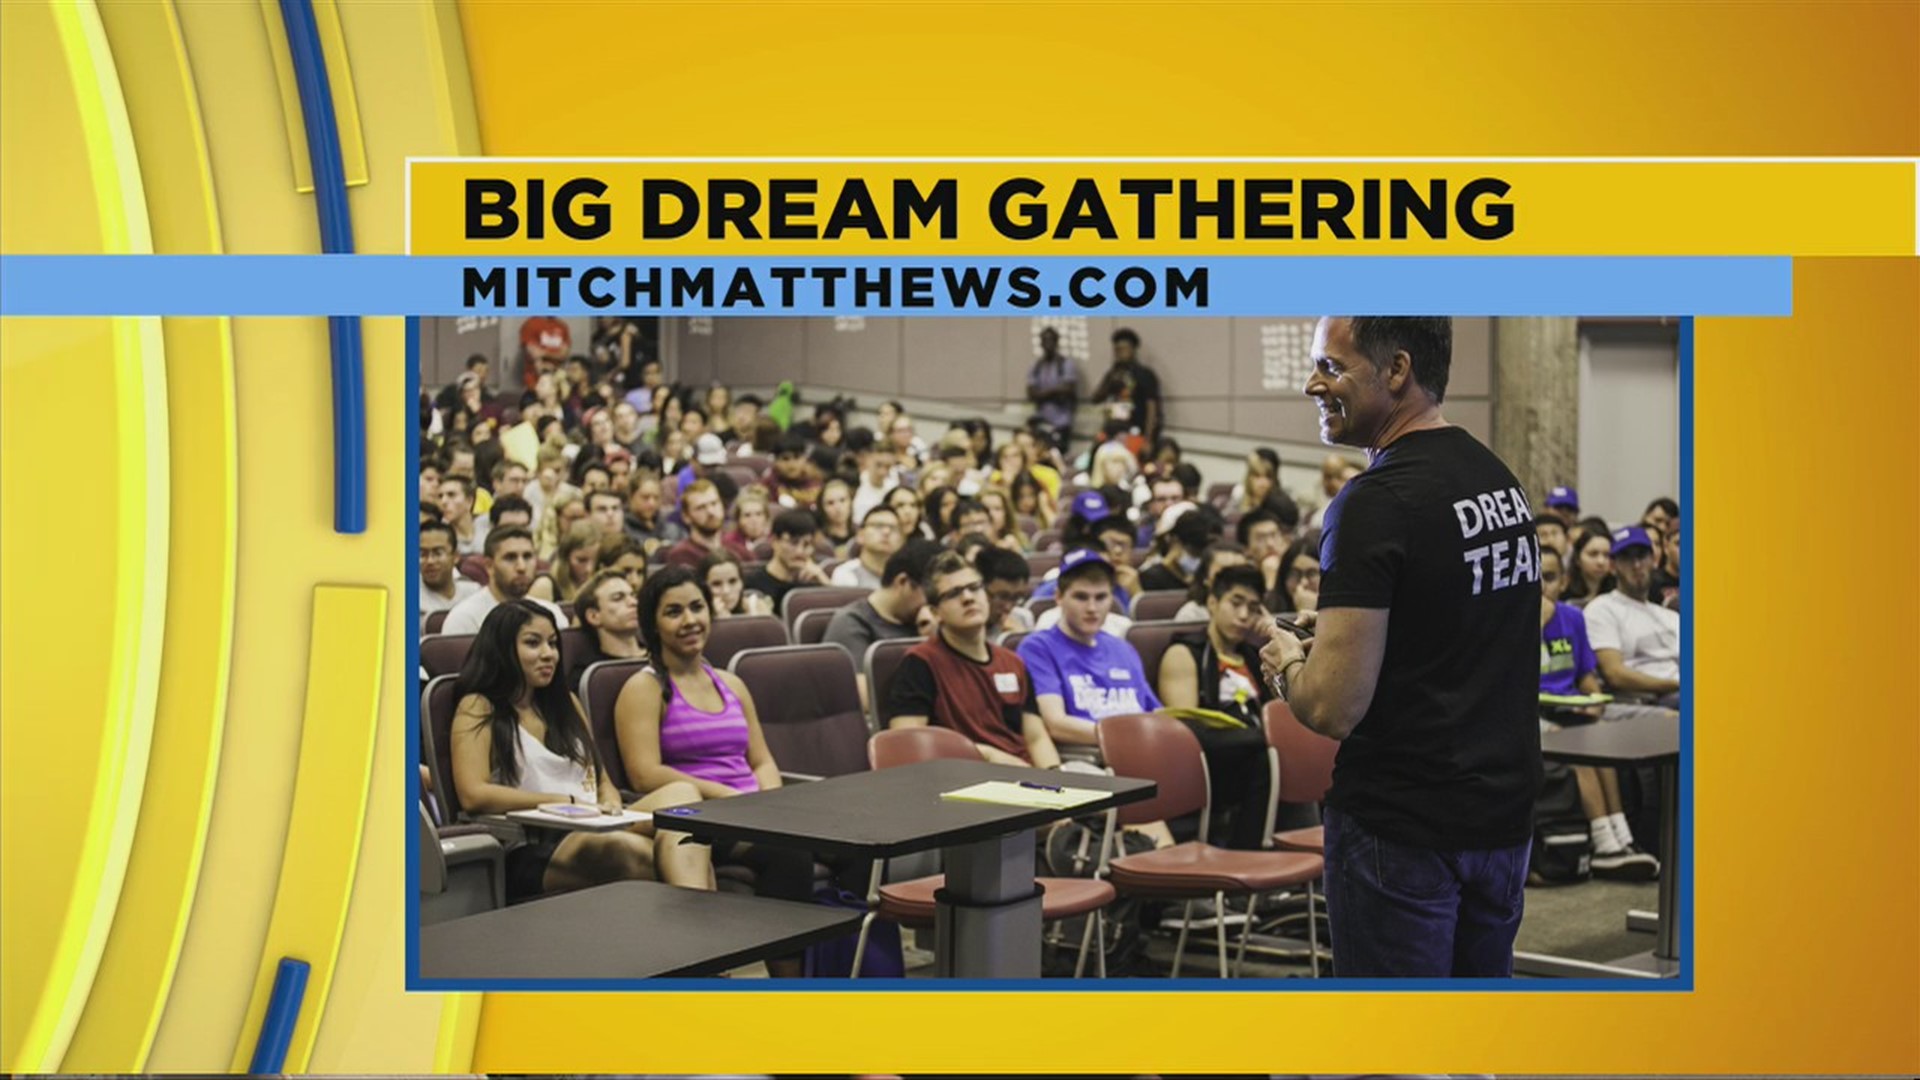 Big Dream Gathering - Working Together to Achieve Your Dreams